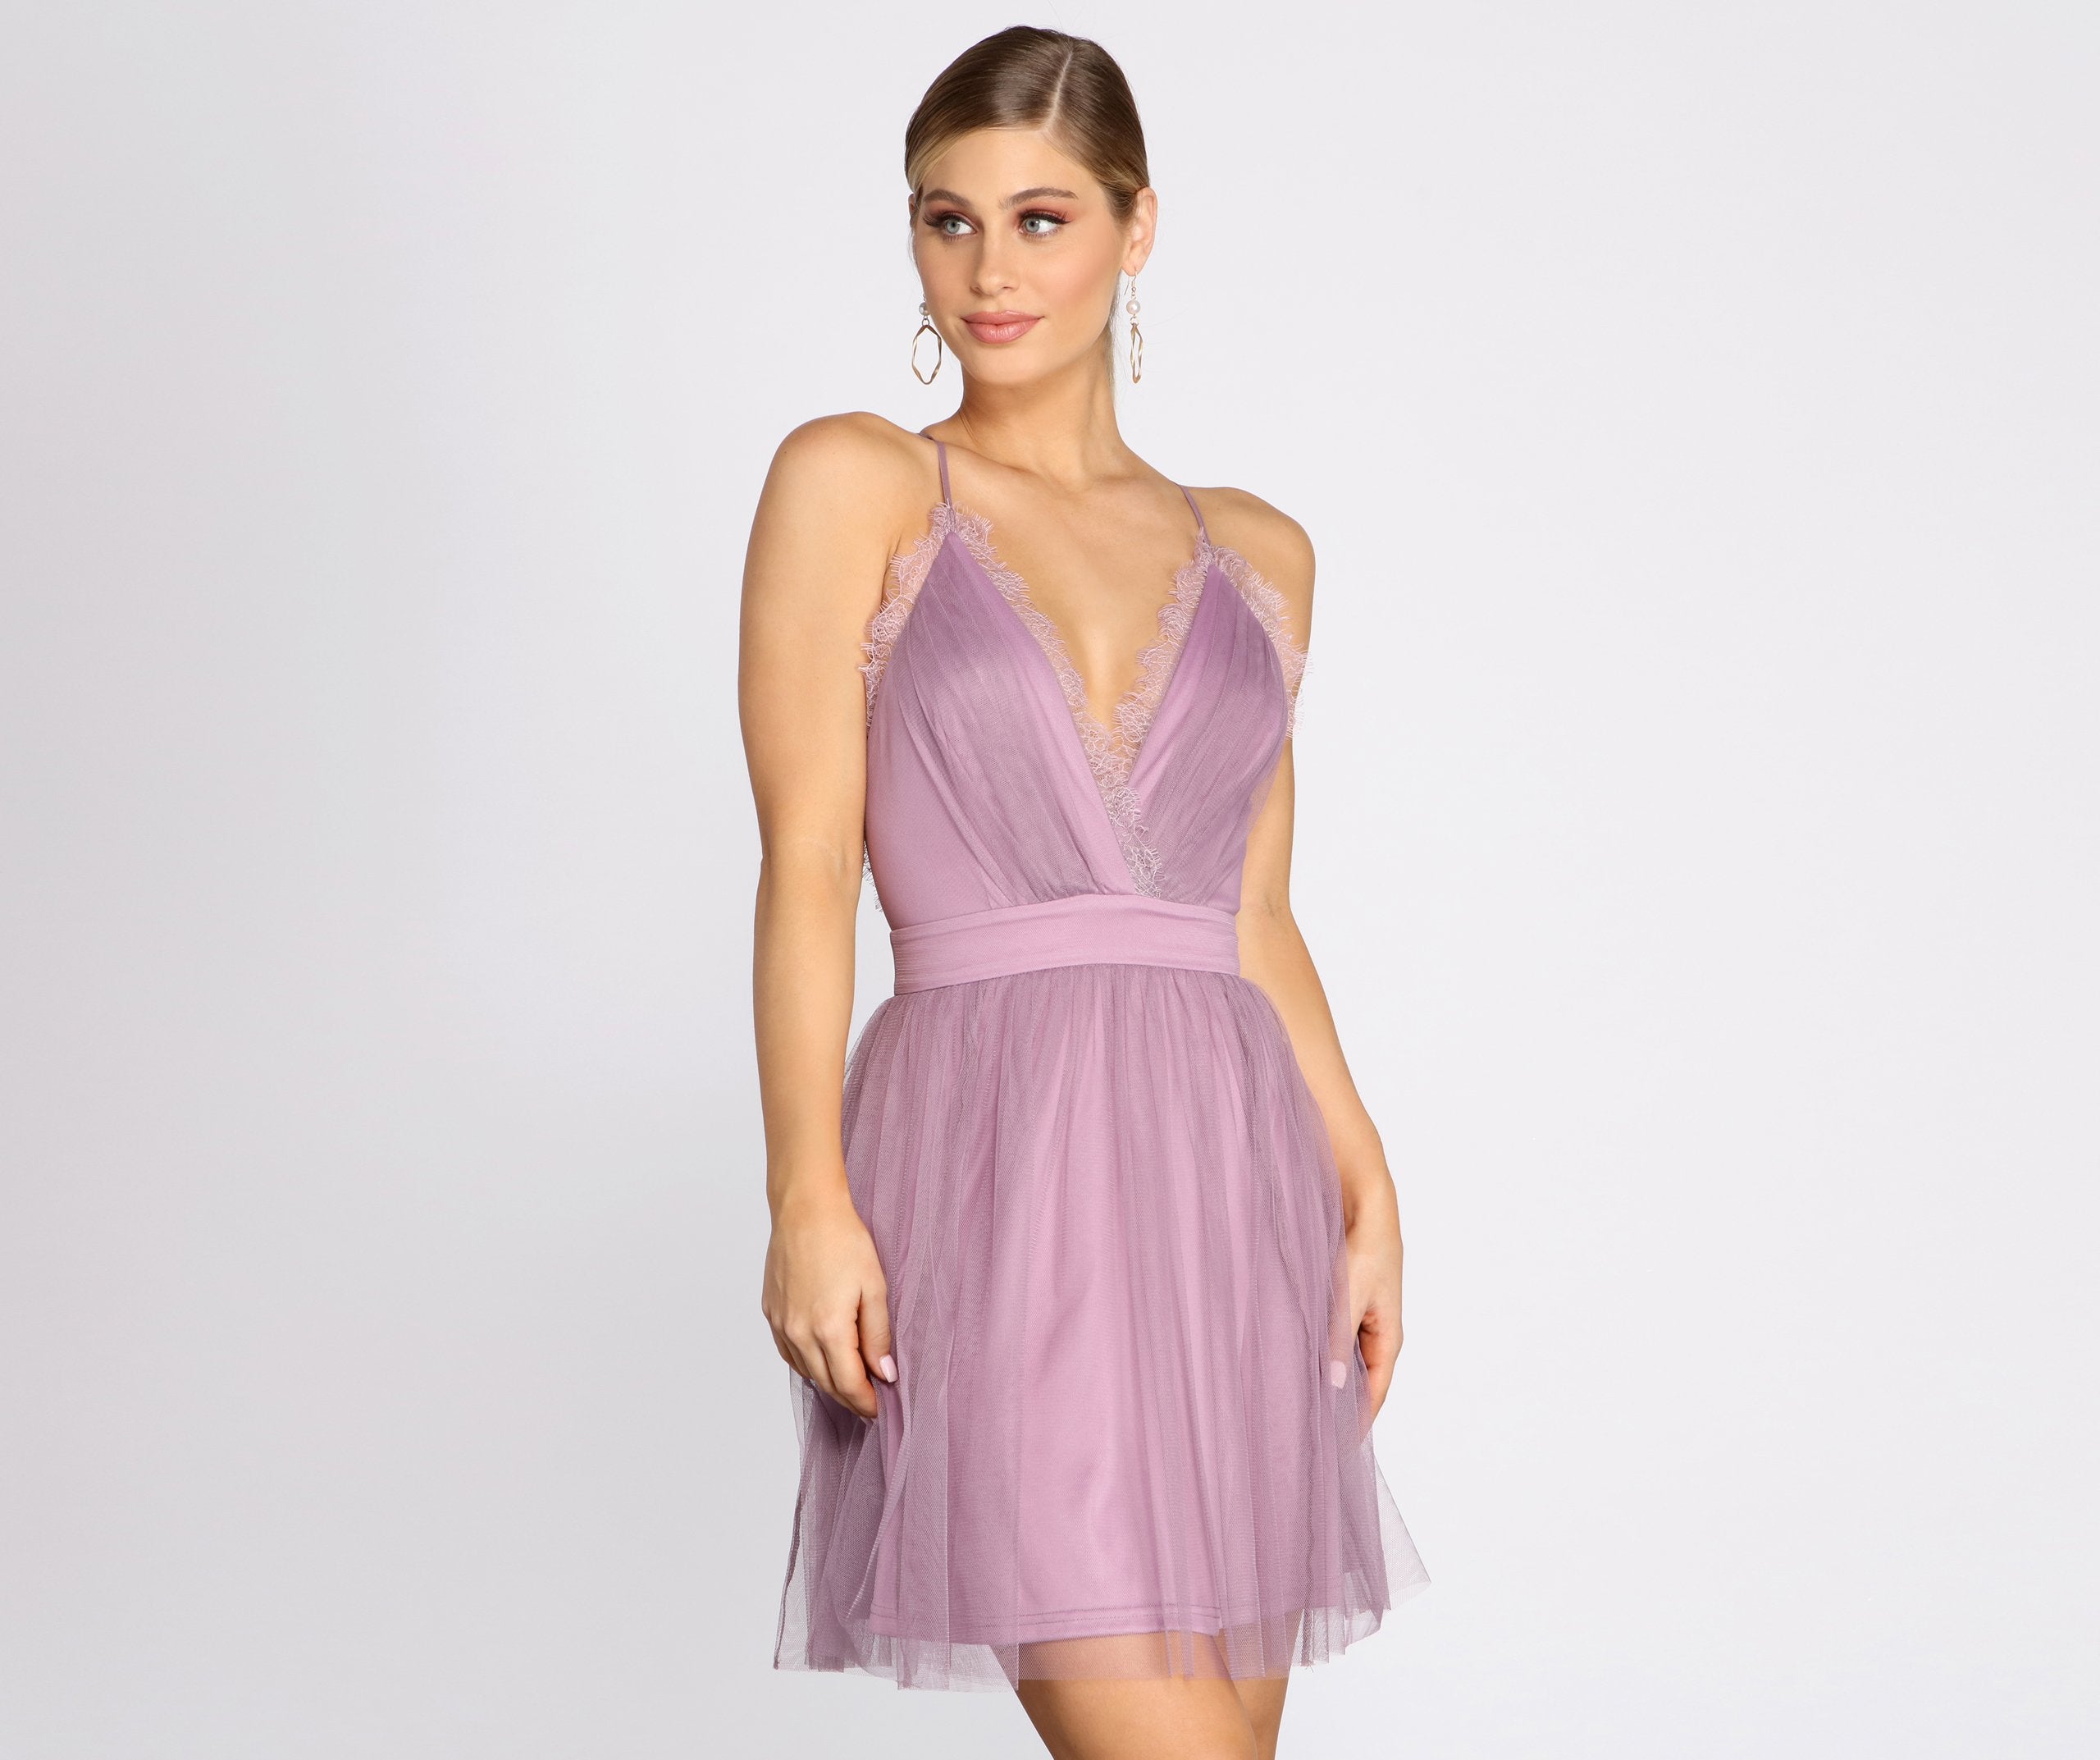 Lace Allure Mesh Skater Dress - Lady Occasions